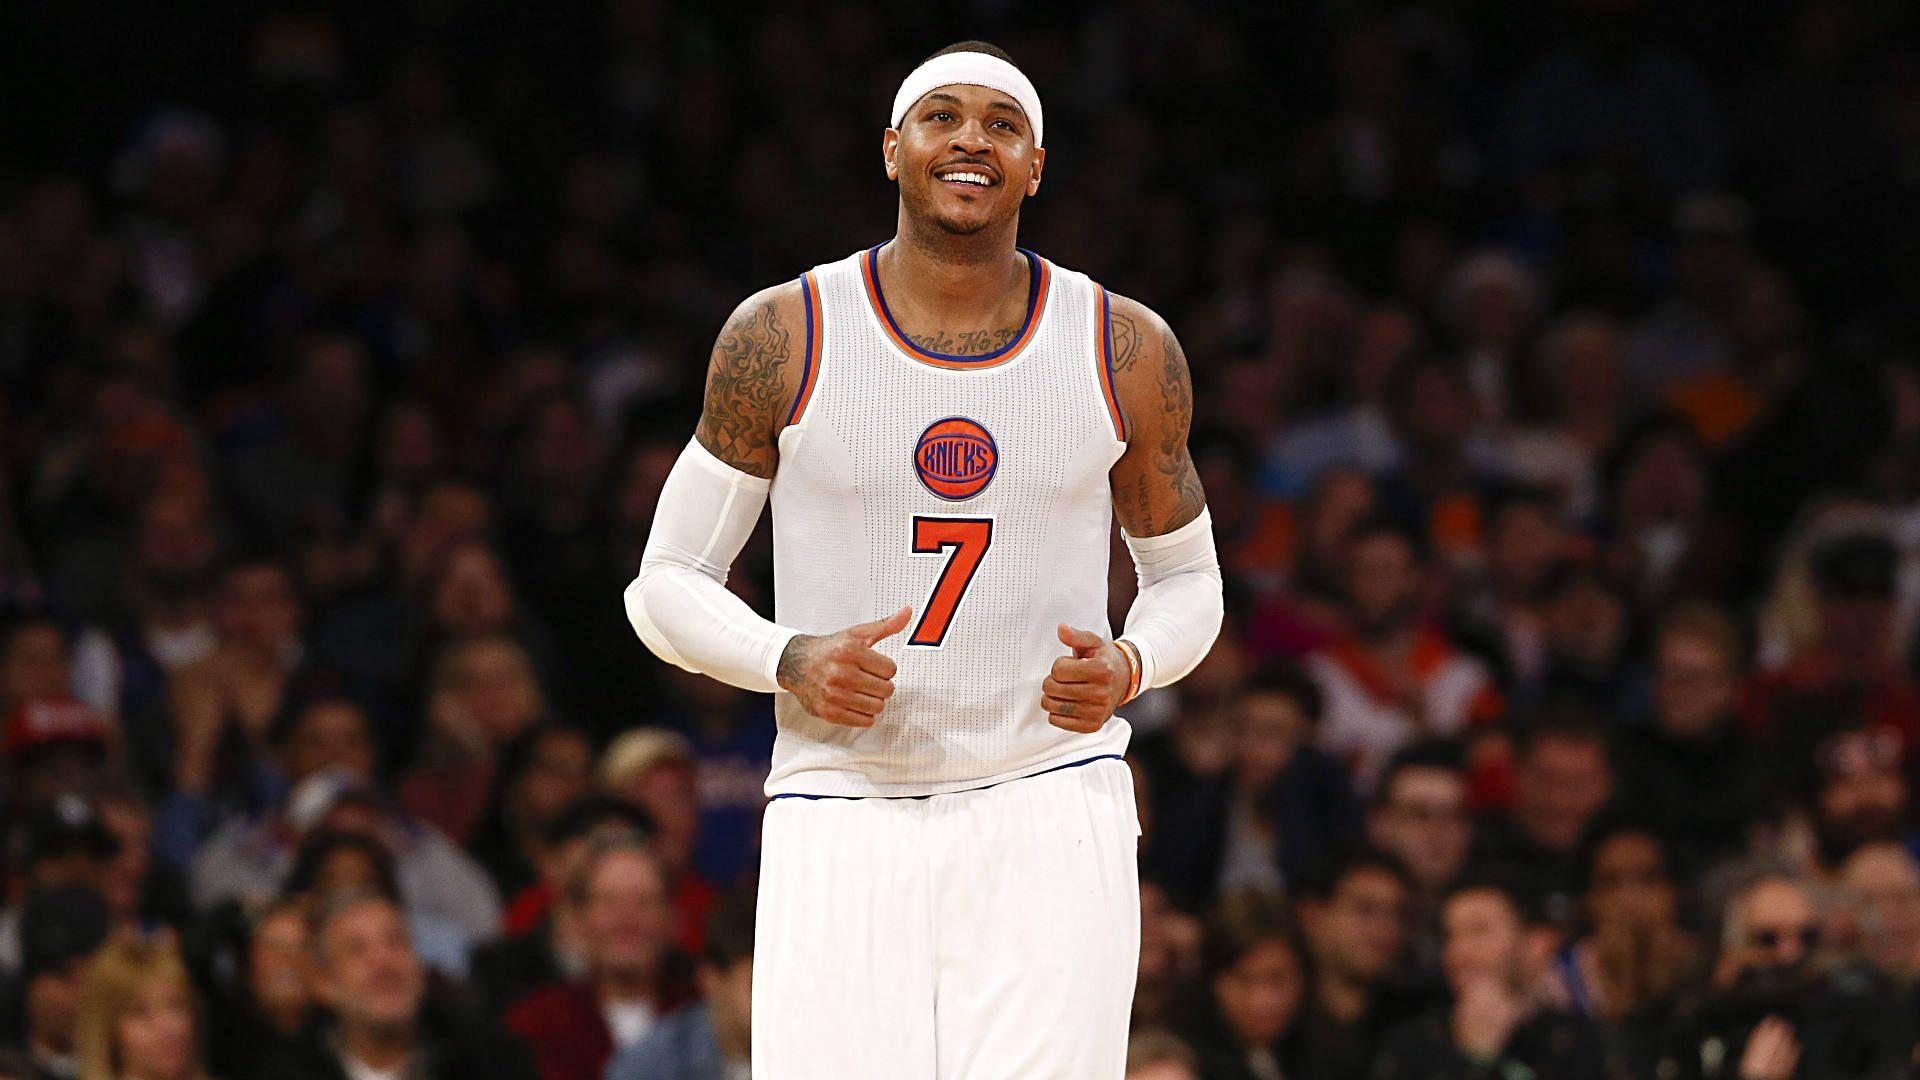 Carmelo Anthony Best Full HD Wallpaper And Photo